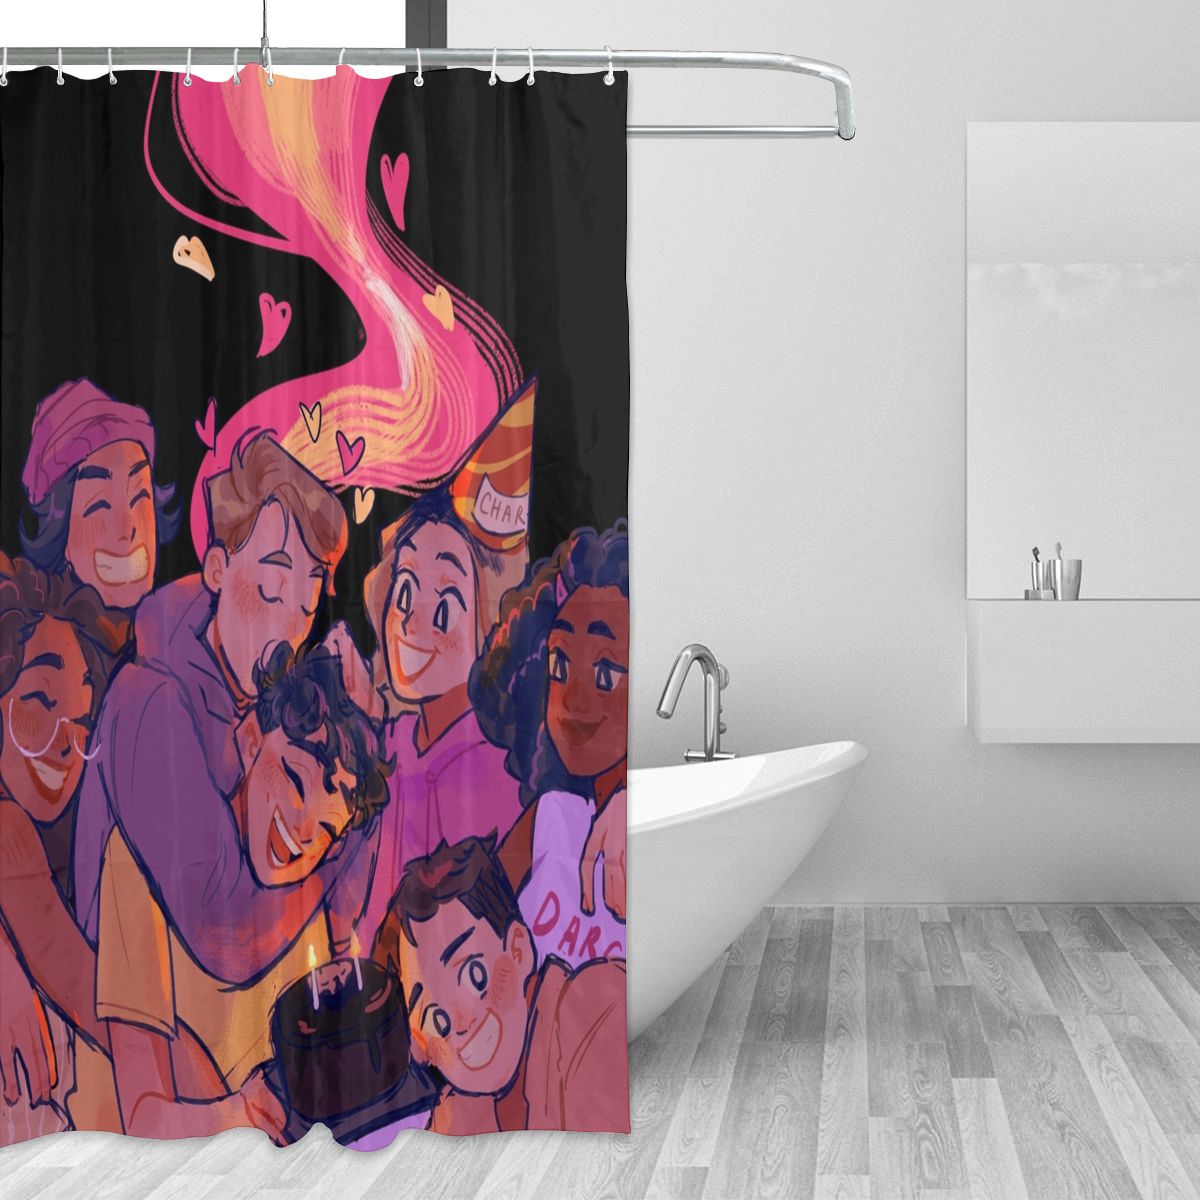 Heartstopper Rainbow Lgbt Bath Shower Curtains Romance Nick Charlie Bathing Screen Curtains with 12 Hook